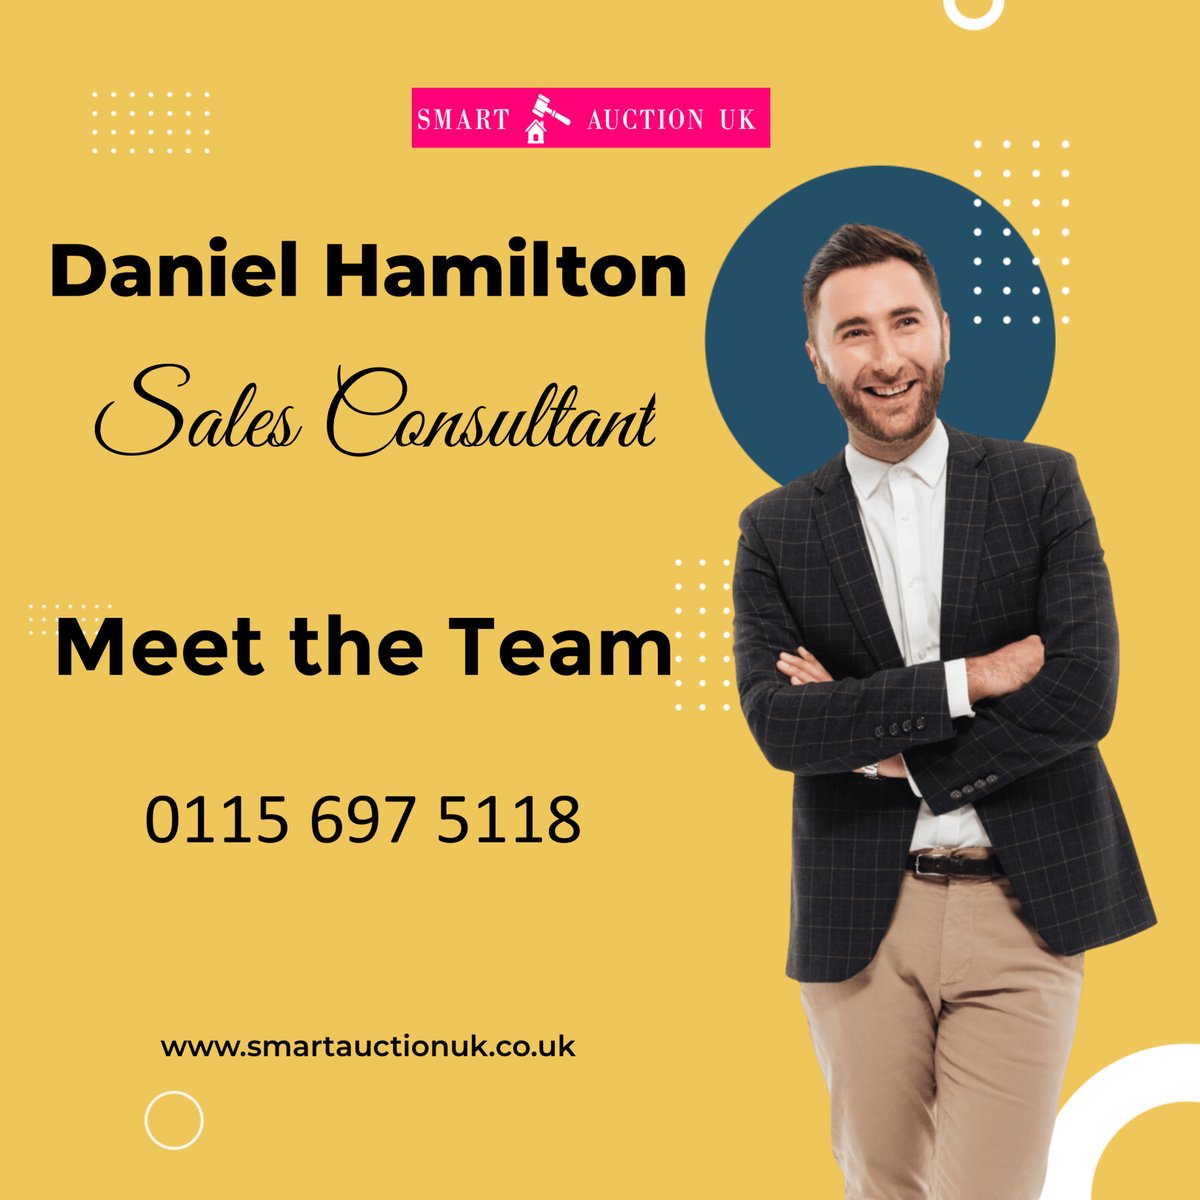 Daniel joined the sales team in 2021, bringing experience, enthusiasm and insight to the role, having been part of the property industry since 2014. 

#smartauctionuk #sellforfree #freeestateagent #ukmarket #propertymarket #housesales #auction #rentorbuy #ownahouse #meettheteam